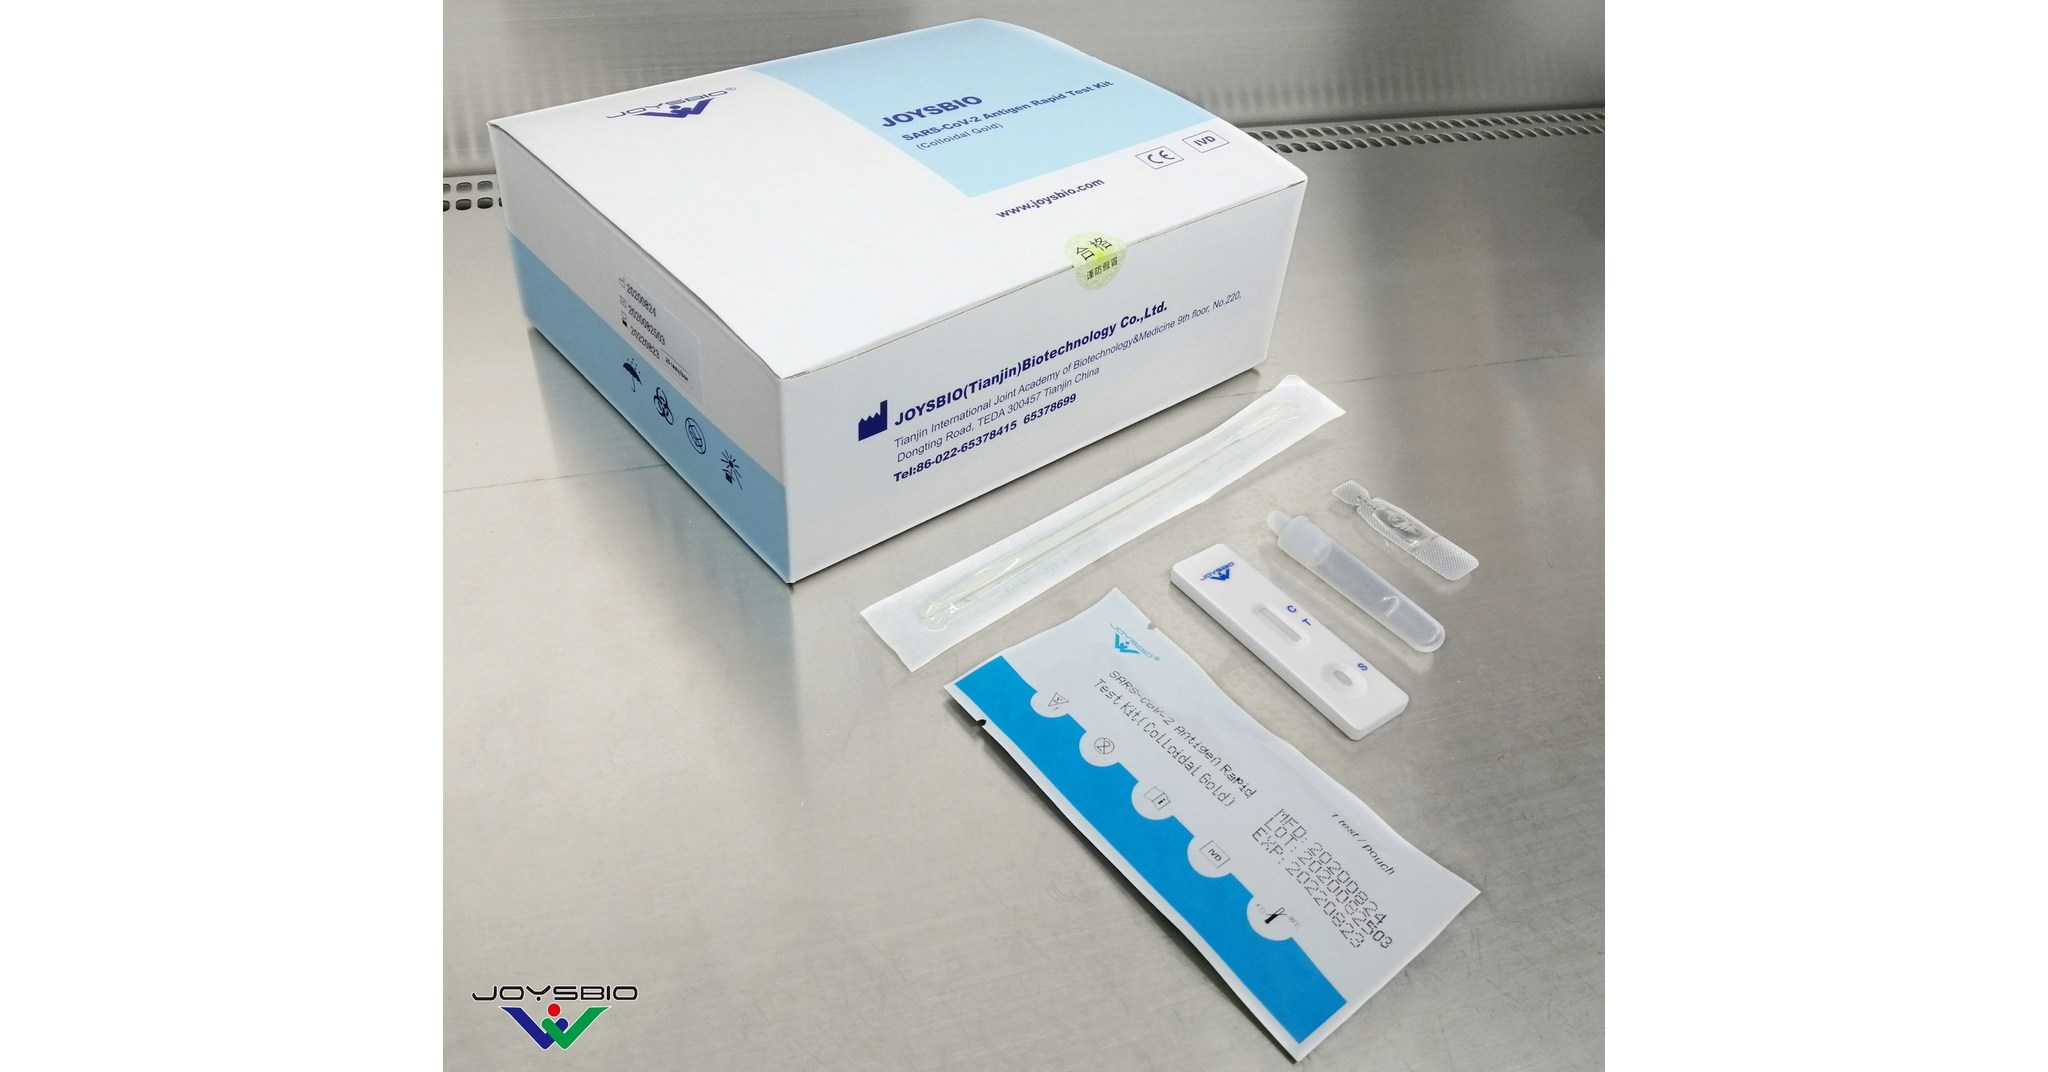 Can I Buy Covid 19 Lateral Flow Test Kits / Sars Cov 2